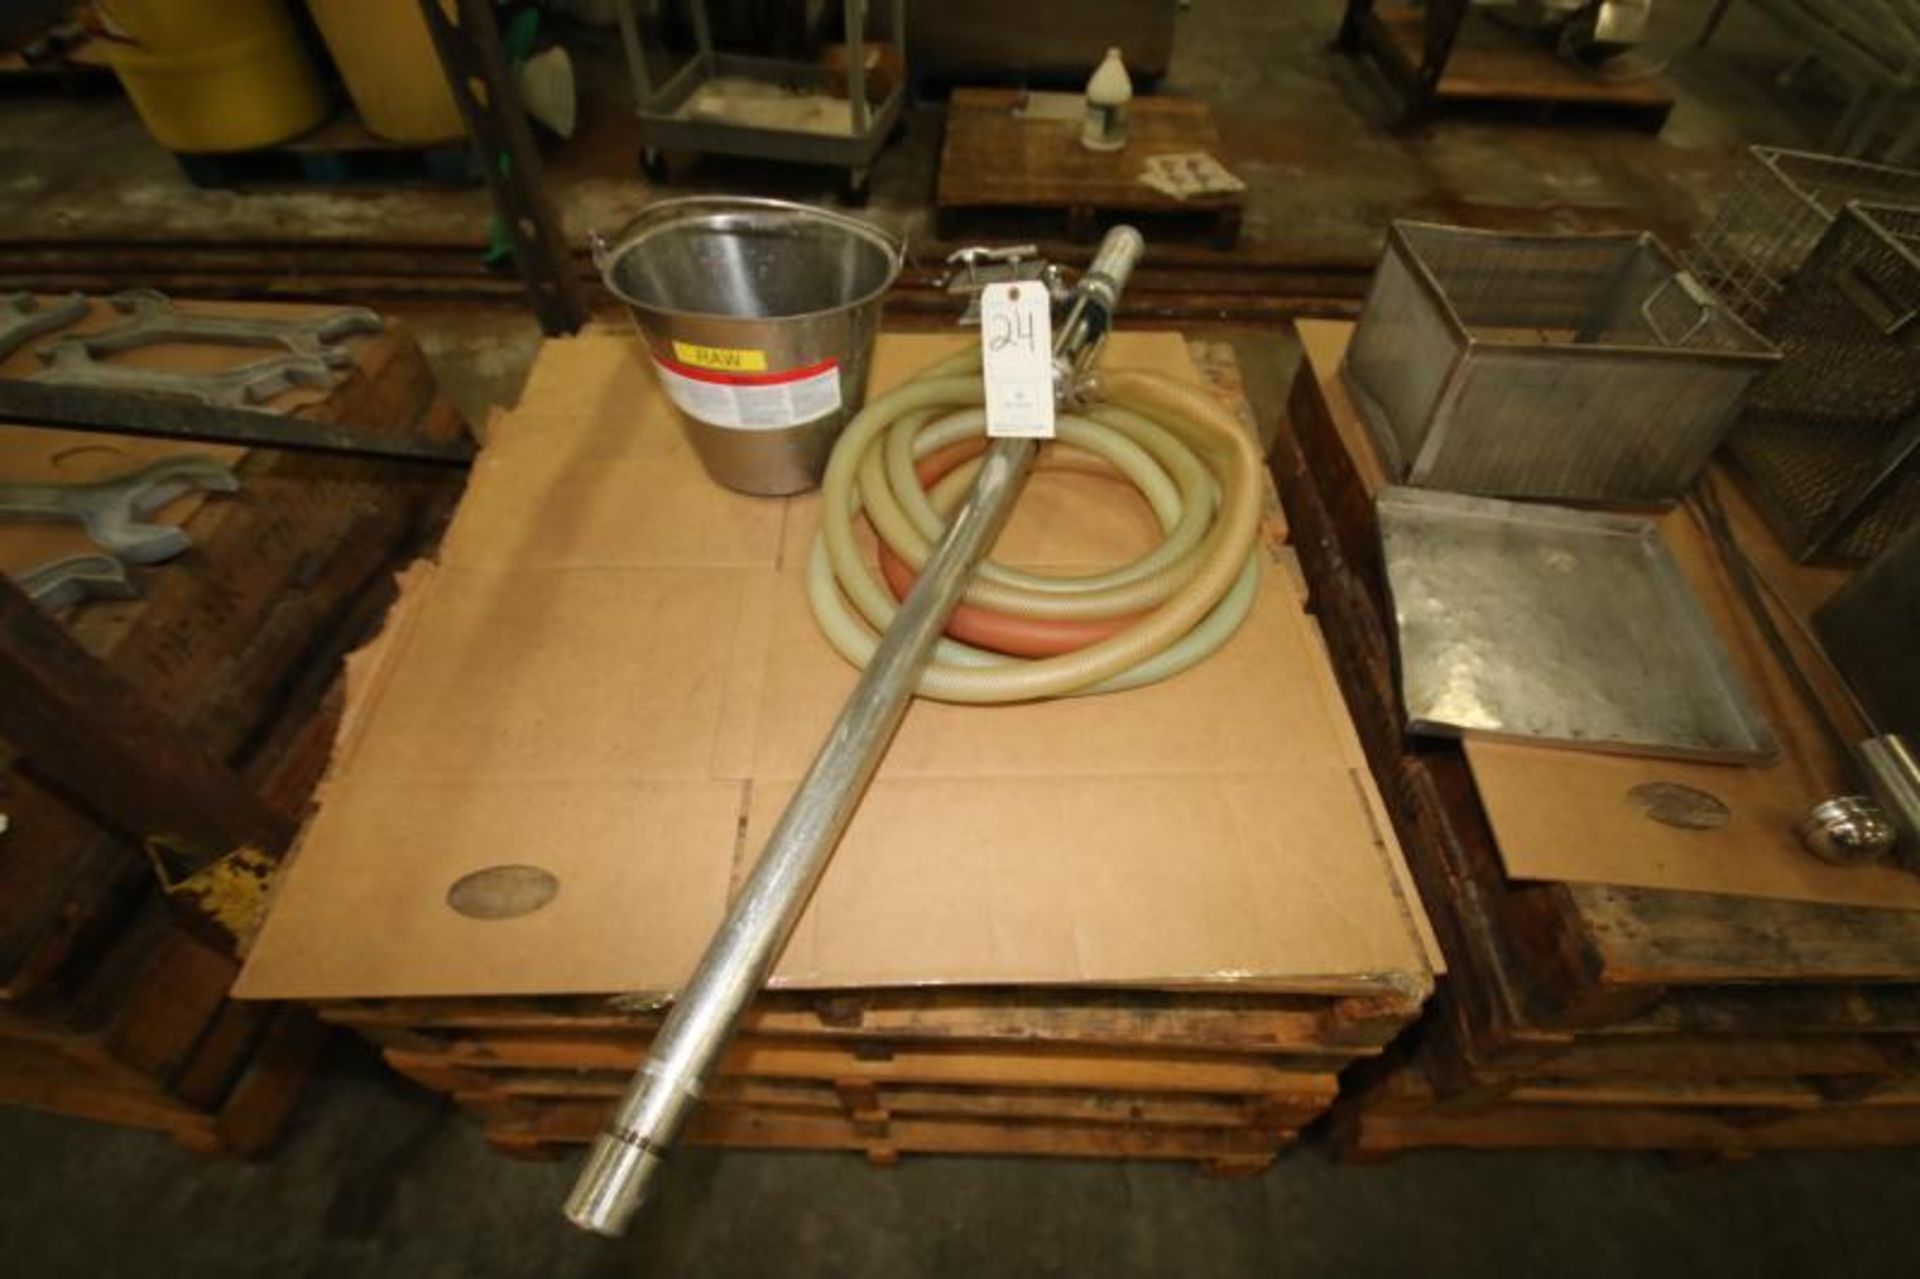 Graco Type Pneumatic Sanitary Barrel Pump with Hose